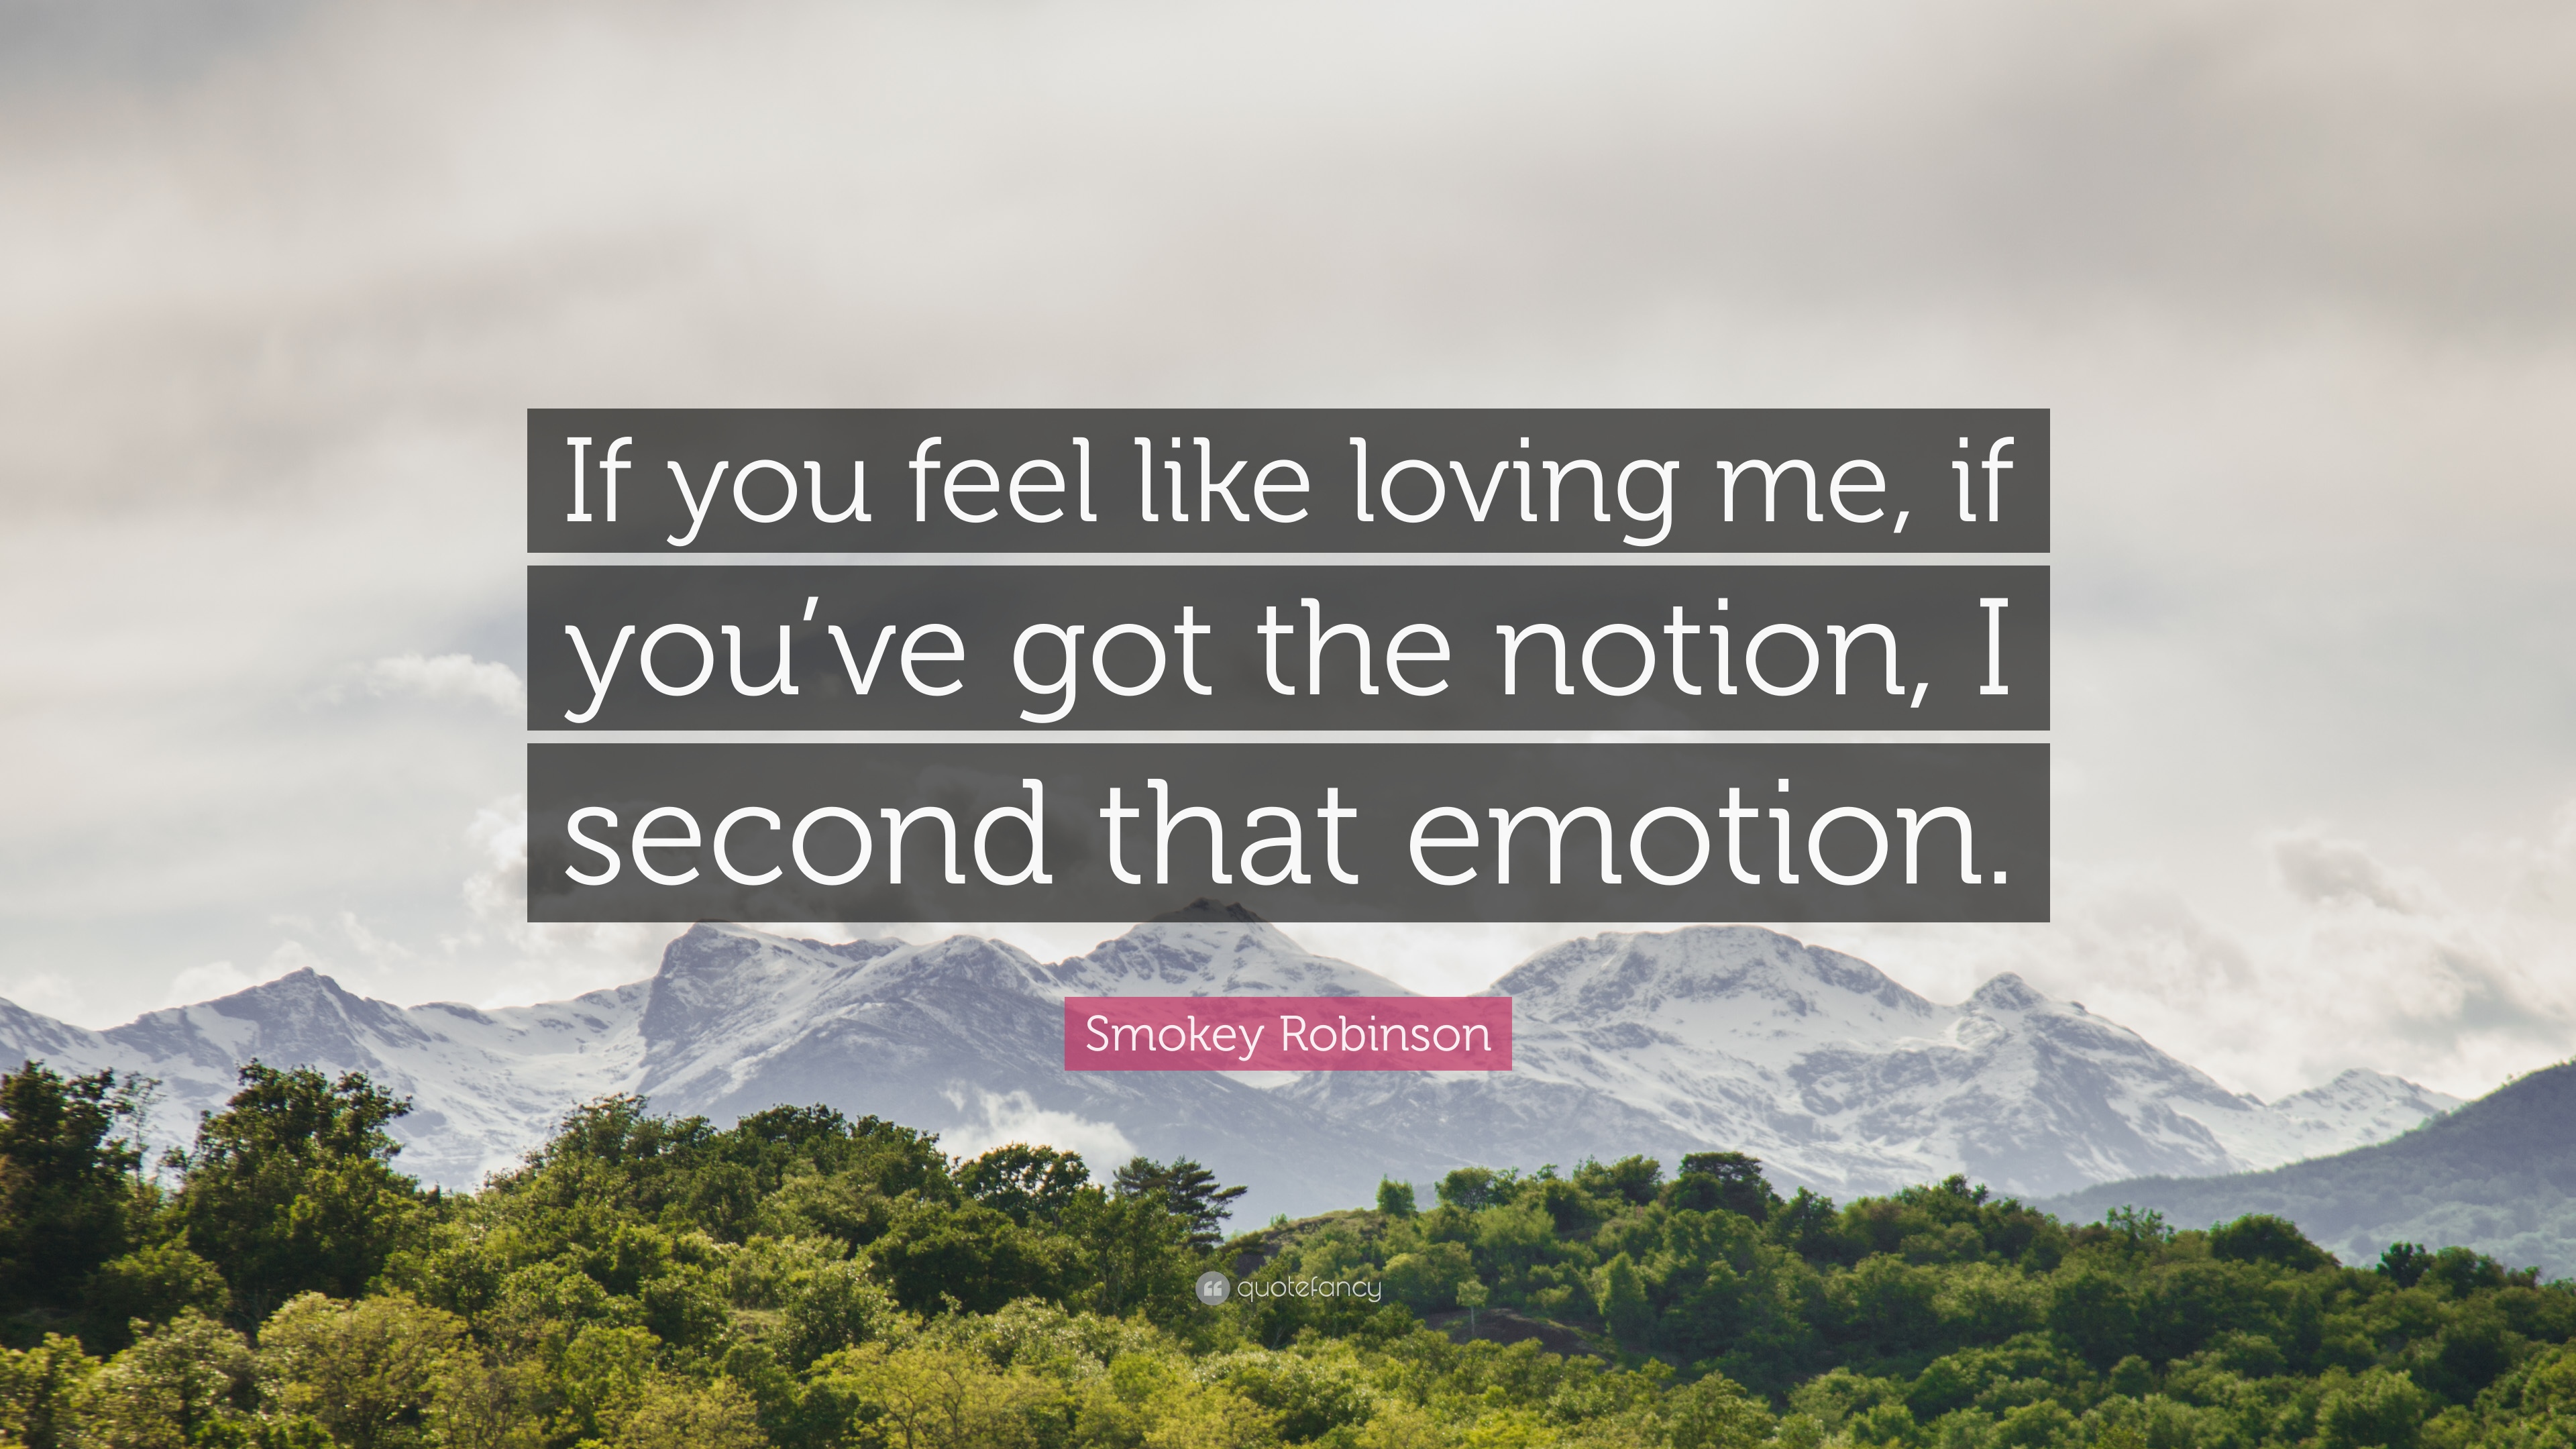 Smokey Robinson Quote: “If you feel like loving me, if you've got